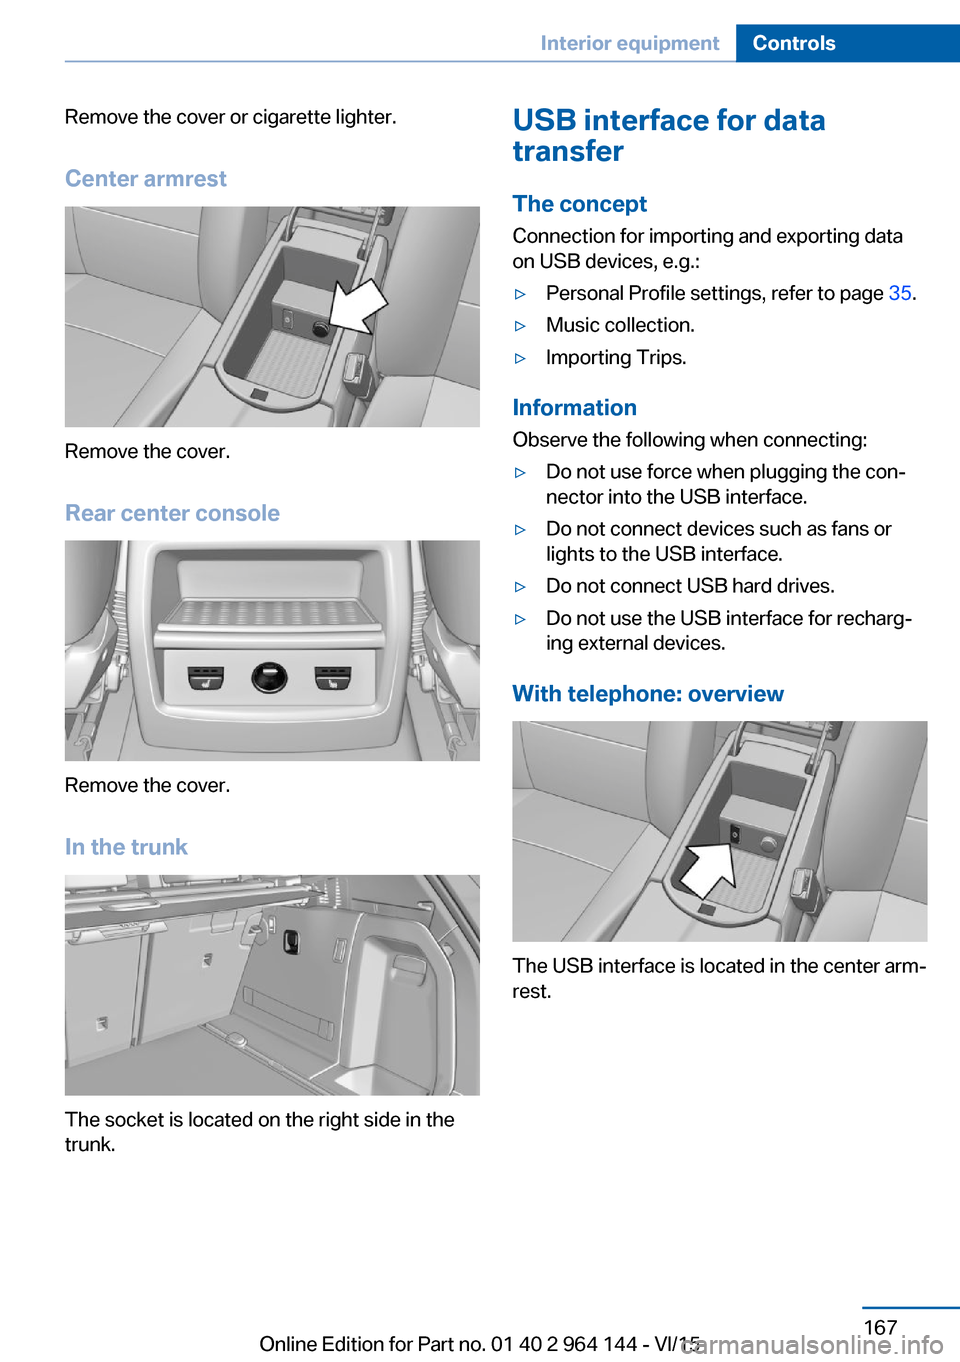 BMW X4 2015 F26 Owners Manual Remove the cover or cigarette lighter.
Center armrest
Remove the cover.
Rear center console
Remove the cover.
In the trunk
The socket is located on the right side in the
trunk.
USB interface for data
